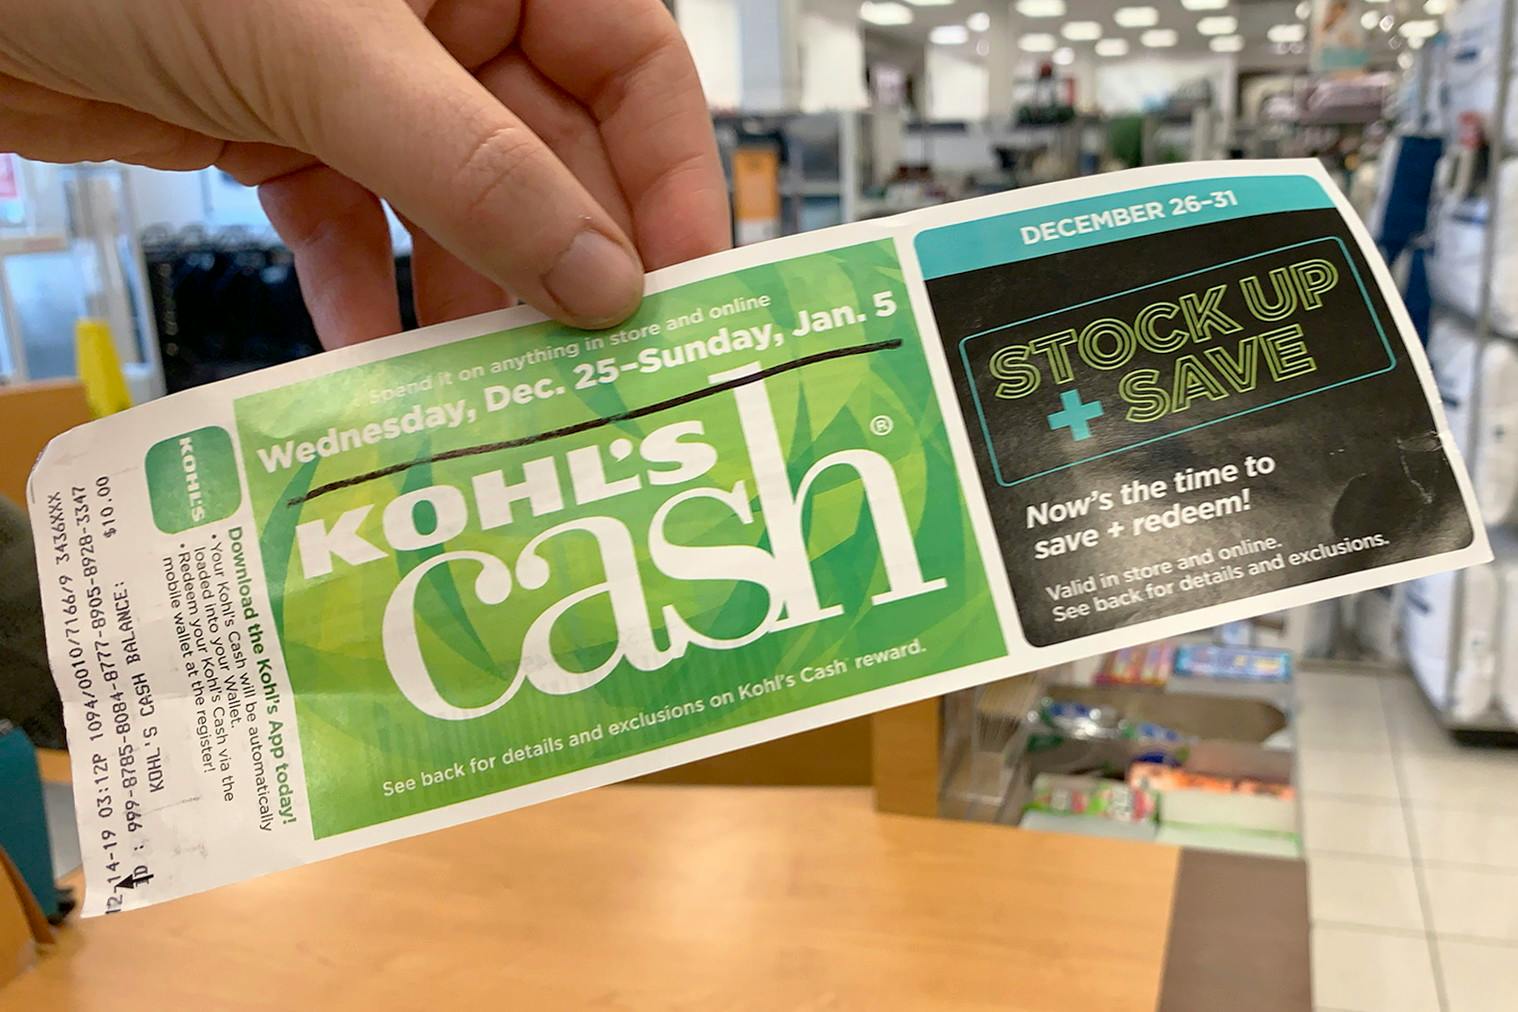 Use expired Kohl's Cash for up to 10 days.